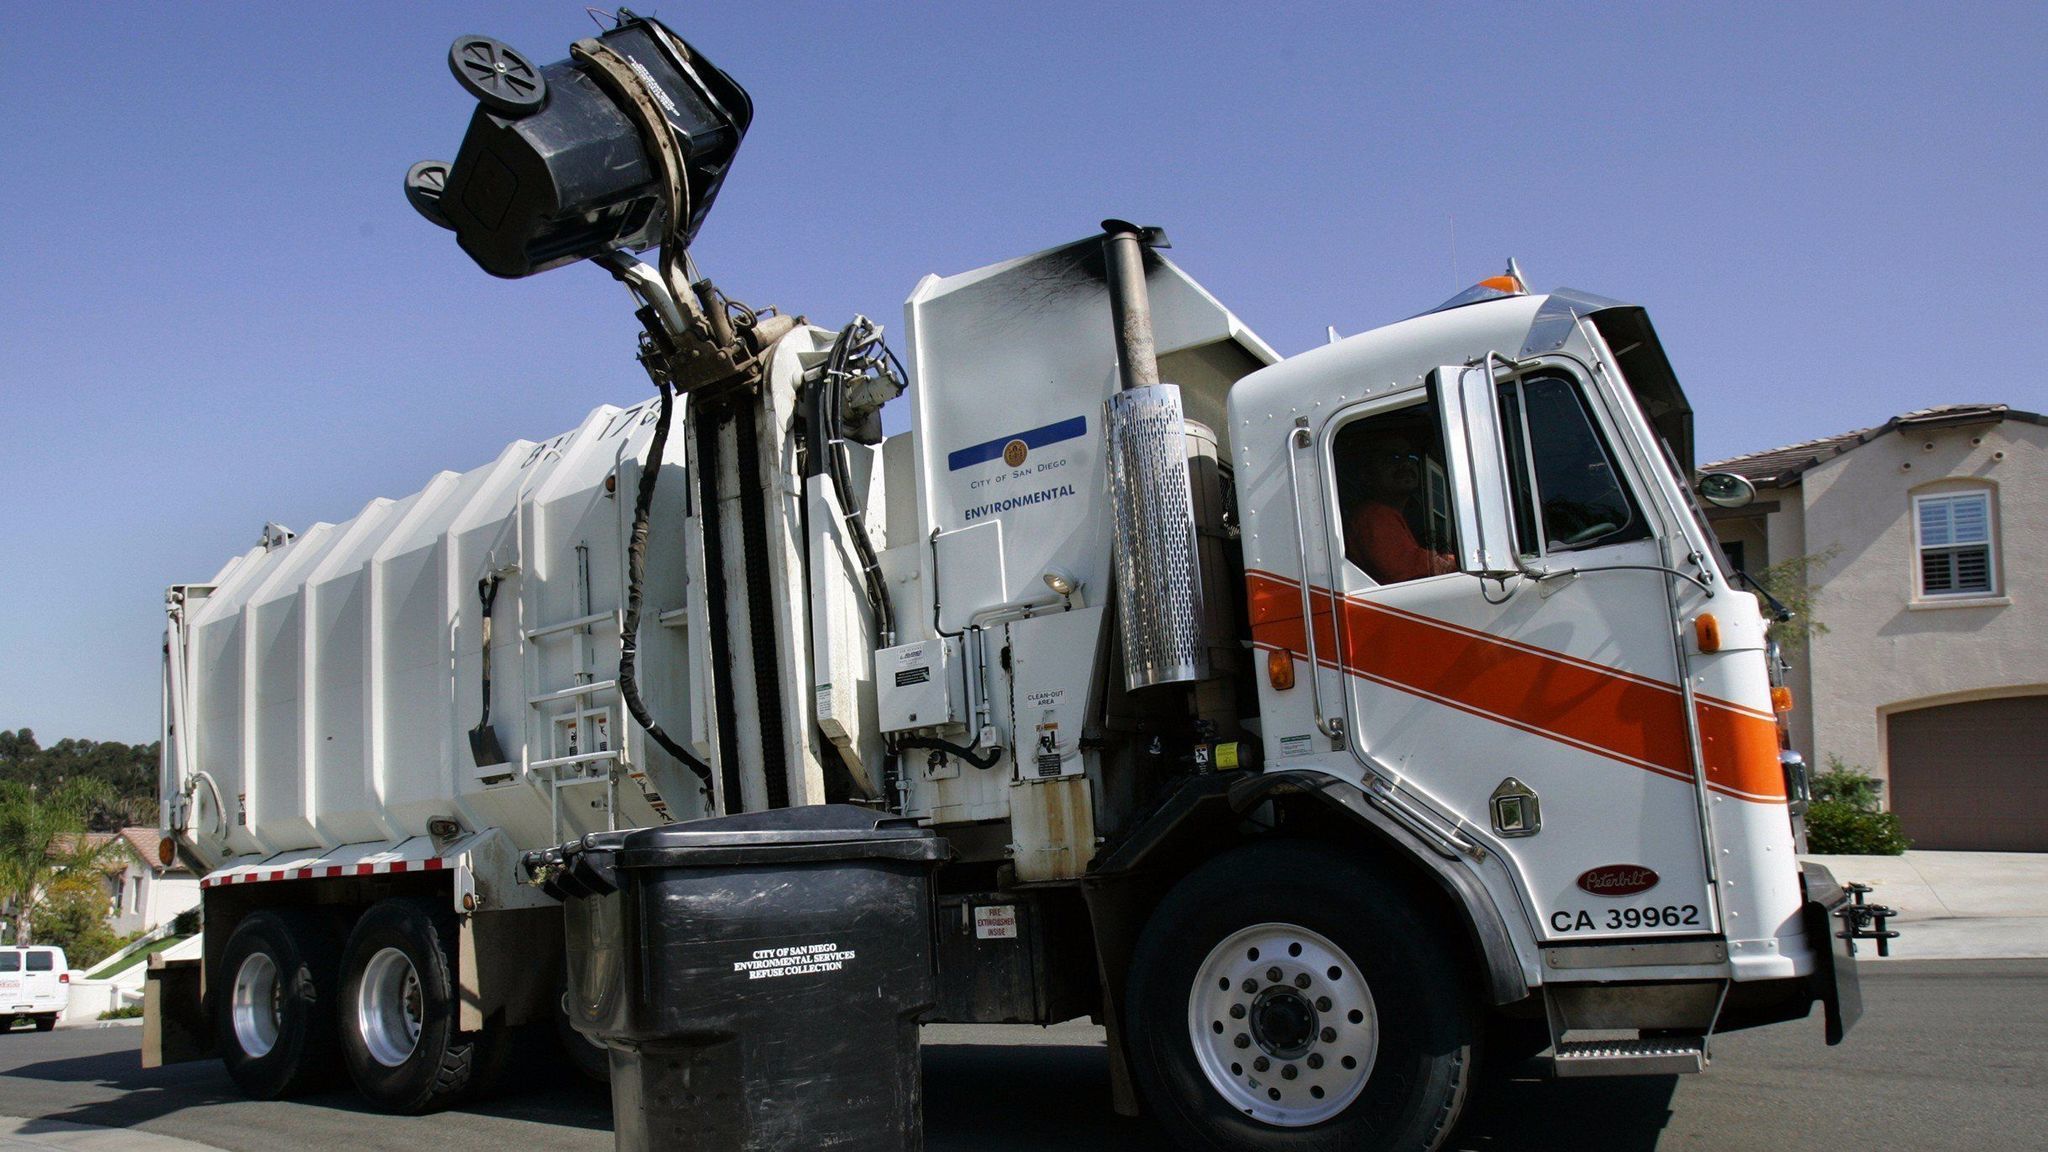 San Diego trash truck drivers get $500K to settle wage 